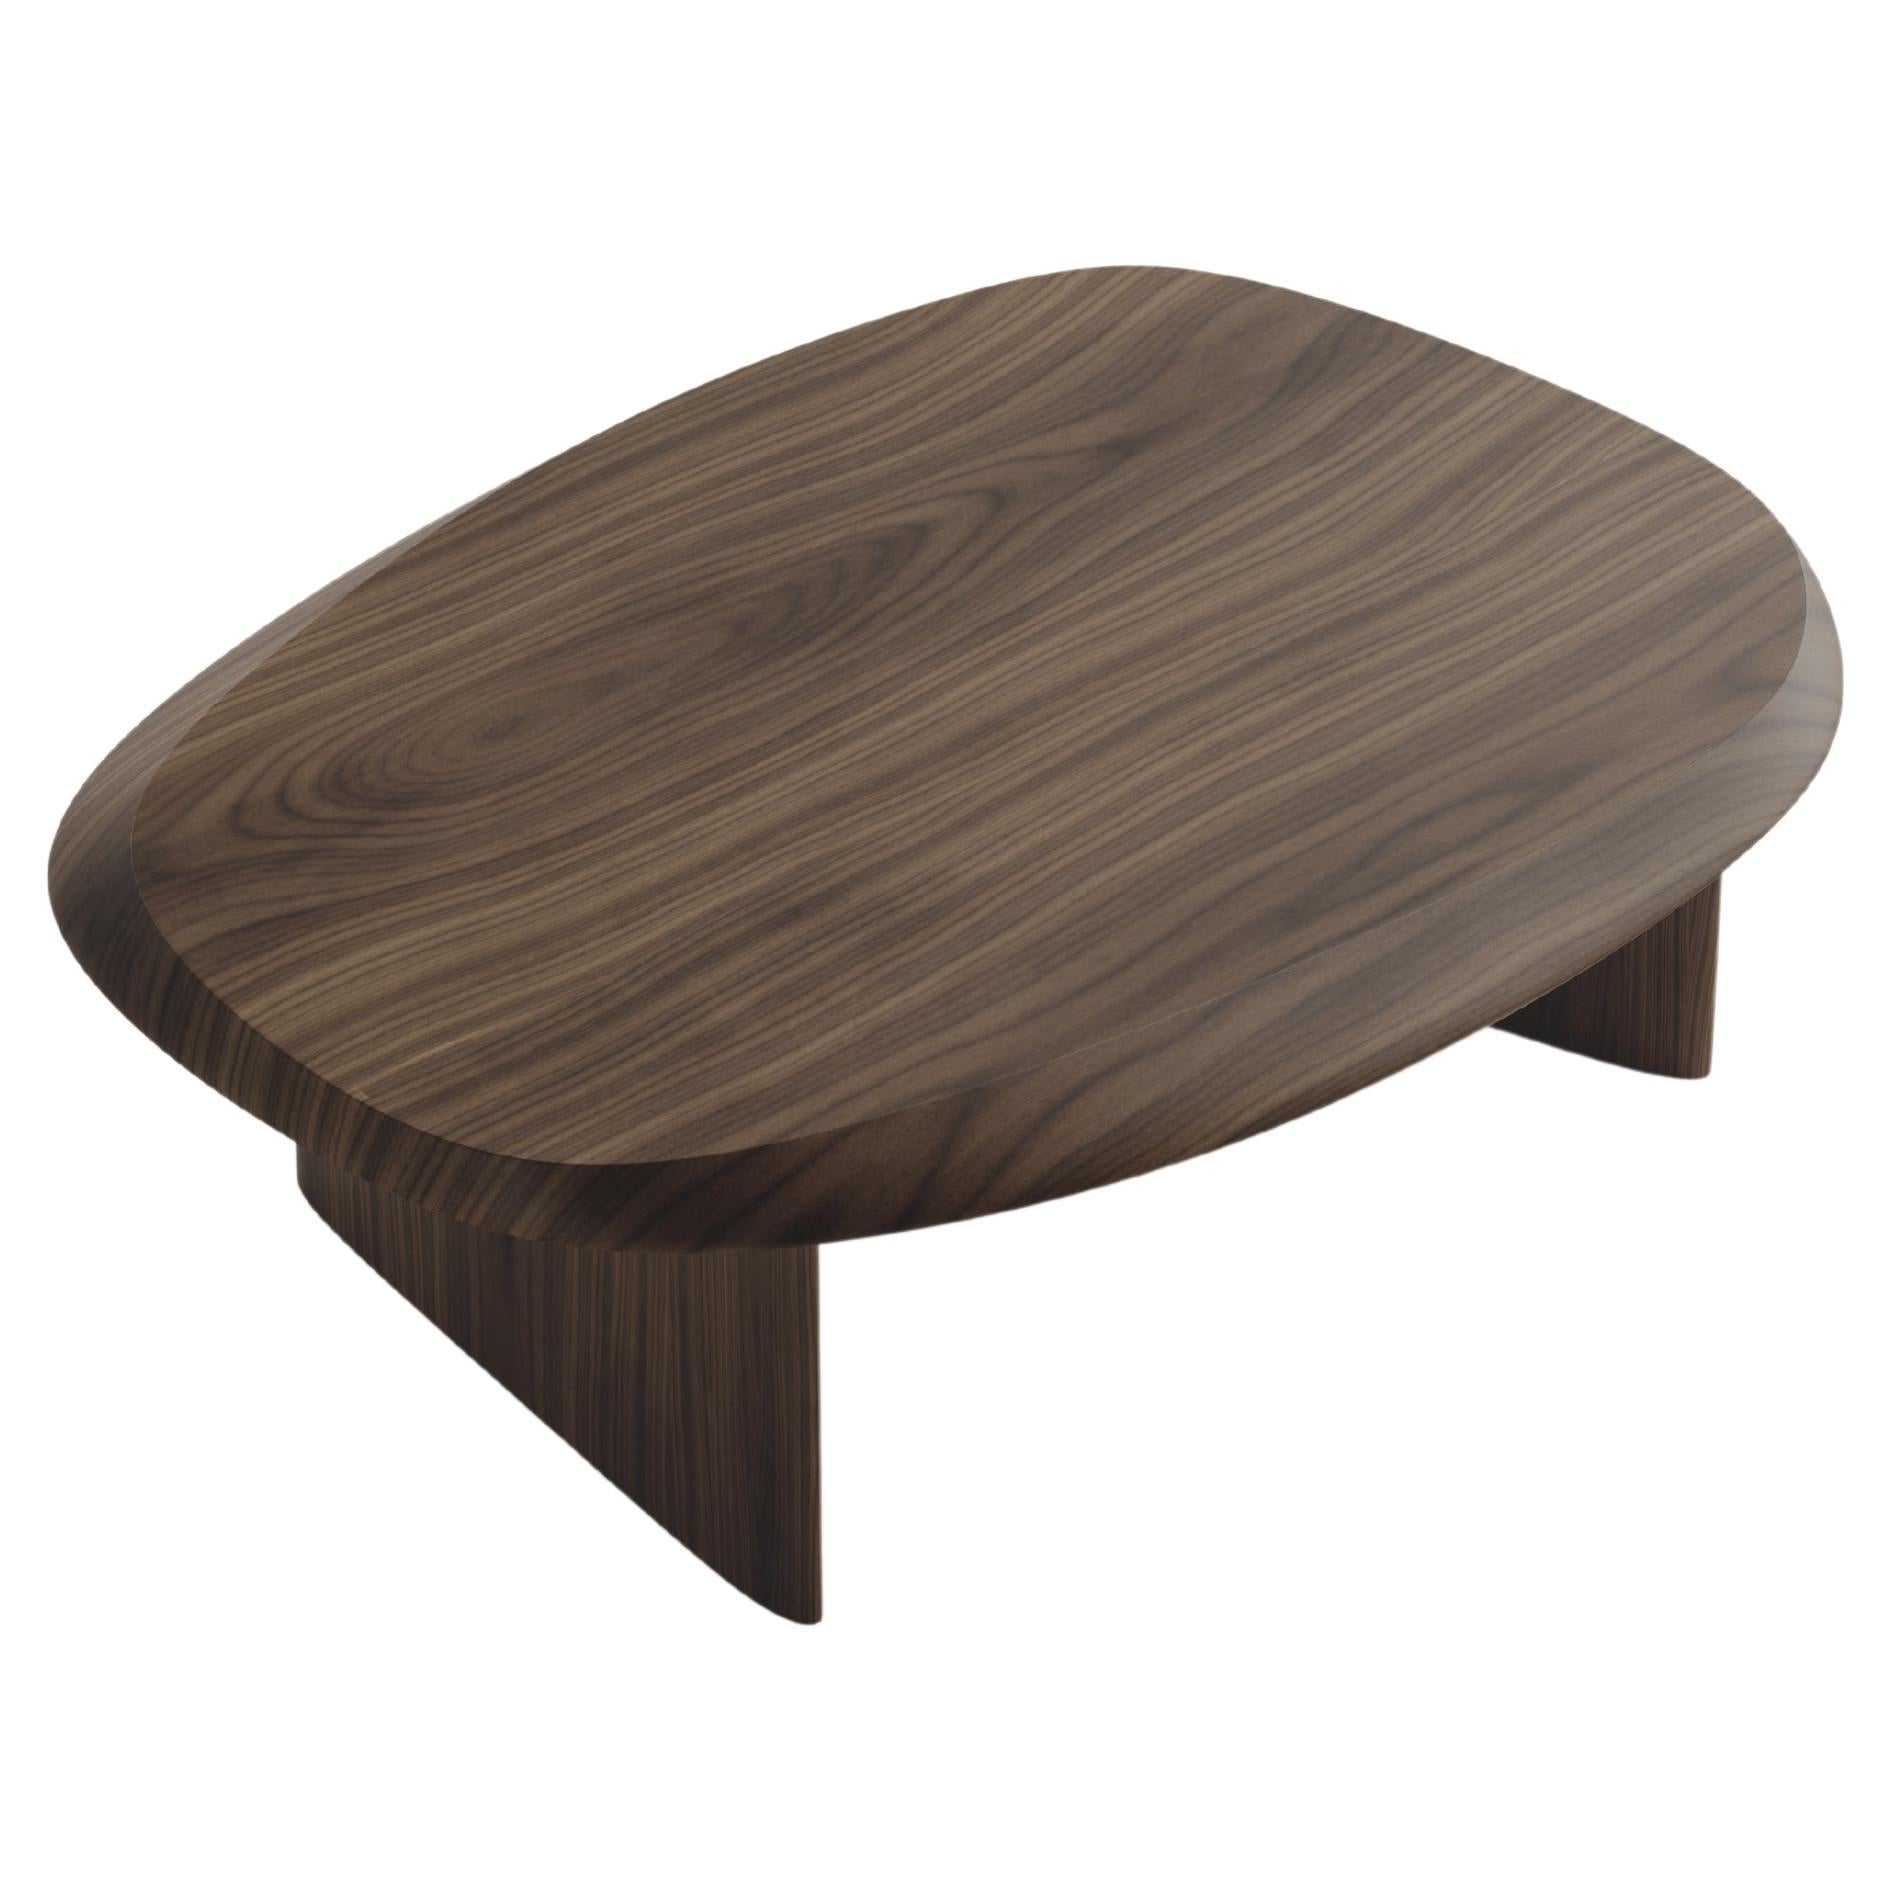 Duna Coffee Table in Solid Walnut Wood, Coffee Table by Joel Escalona For Sale